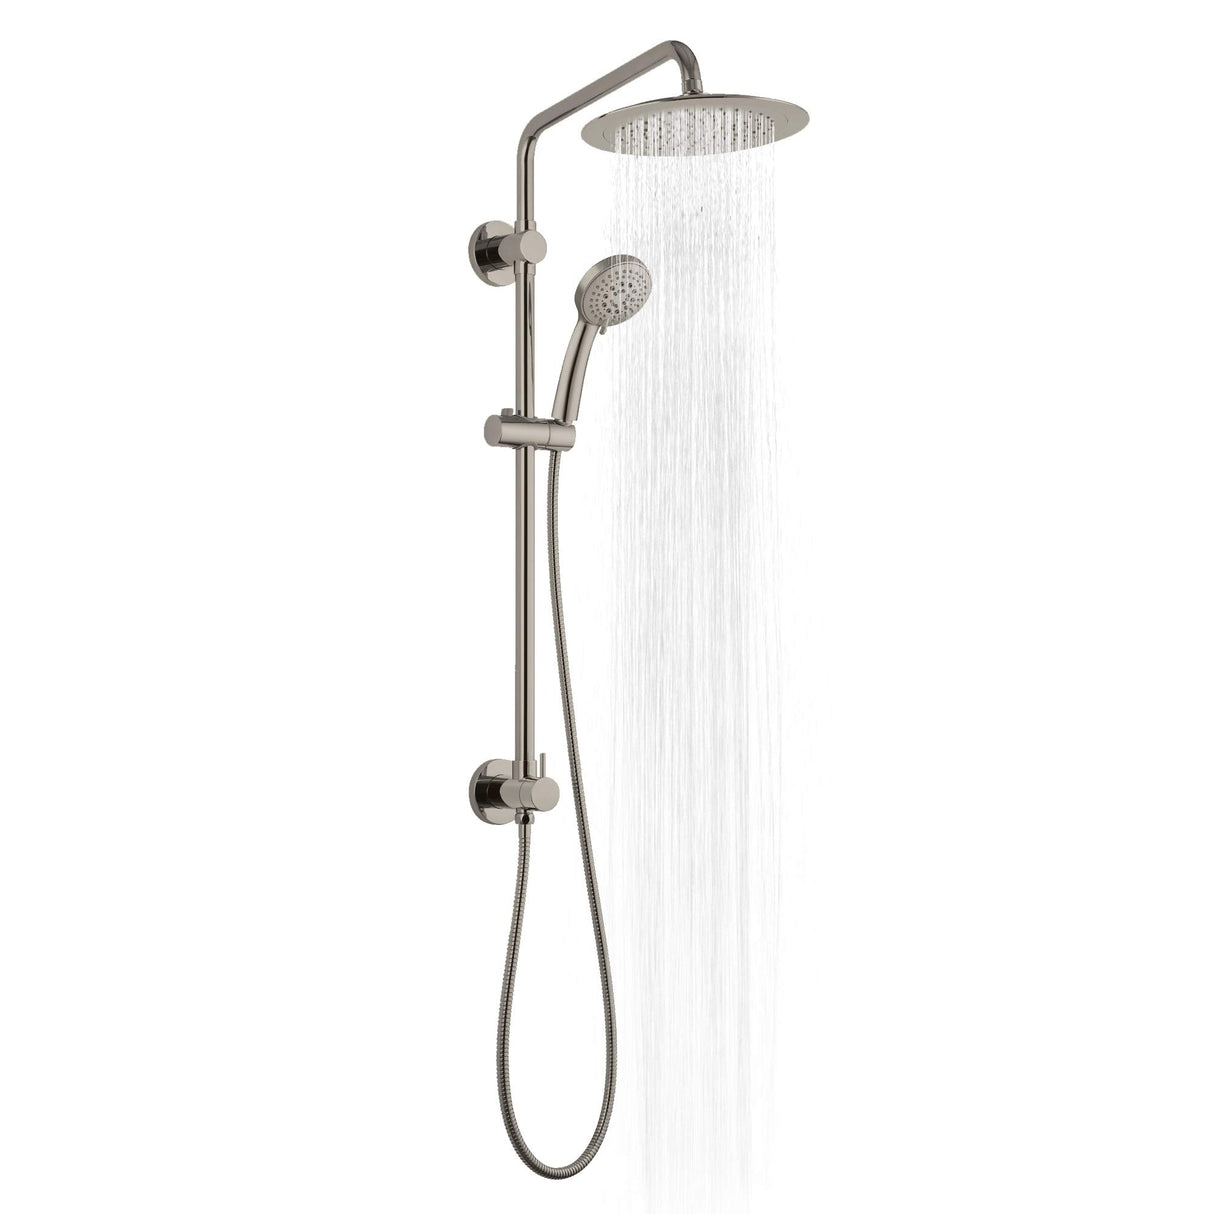 PULSE ShowerSpas 1088-BN-1.8GPM SeaBreeze II Shower System with 8" Rain Showerhead, Slide Bar and Multi-Function Hand Shower, Brushed Nickel, 1.8 GPM